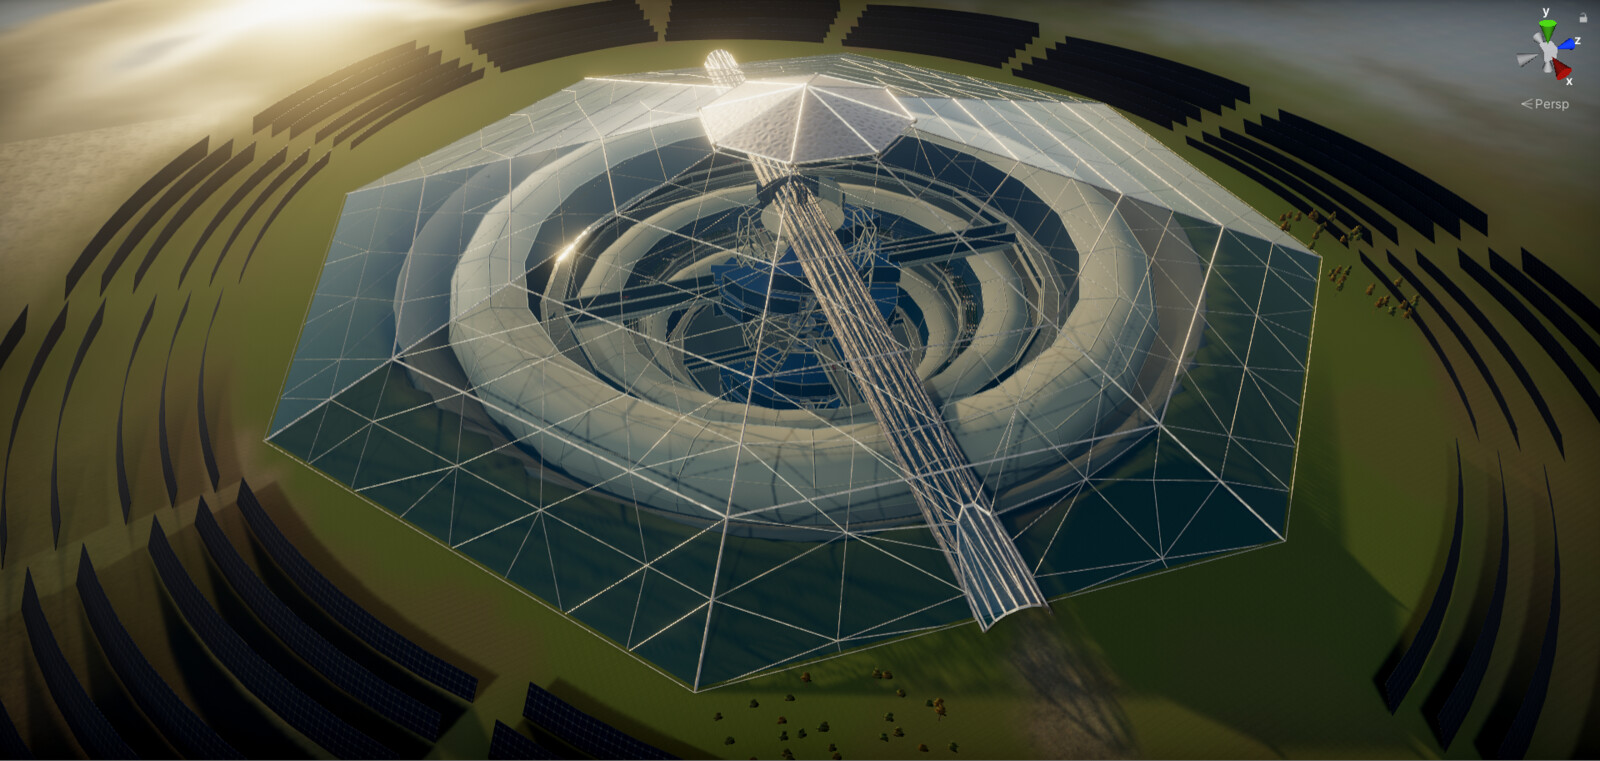 Looking down into the mine through the dome with the solar panel array surrounding it - Unity screenshot